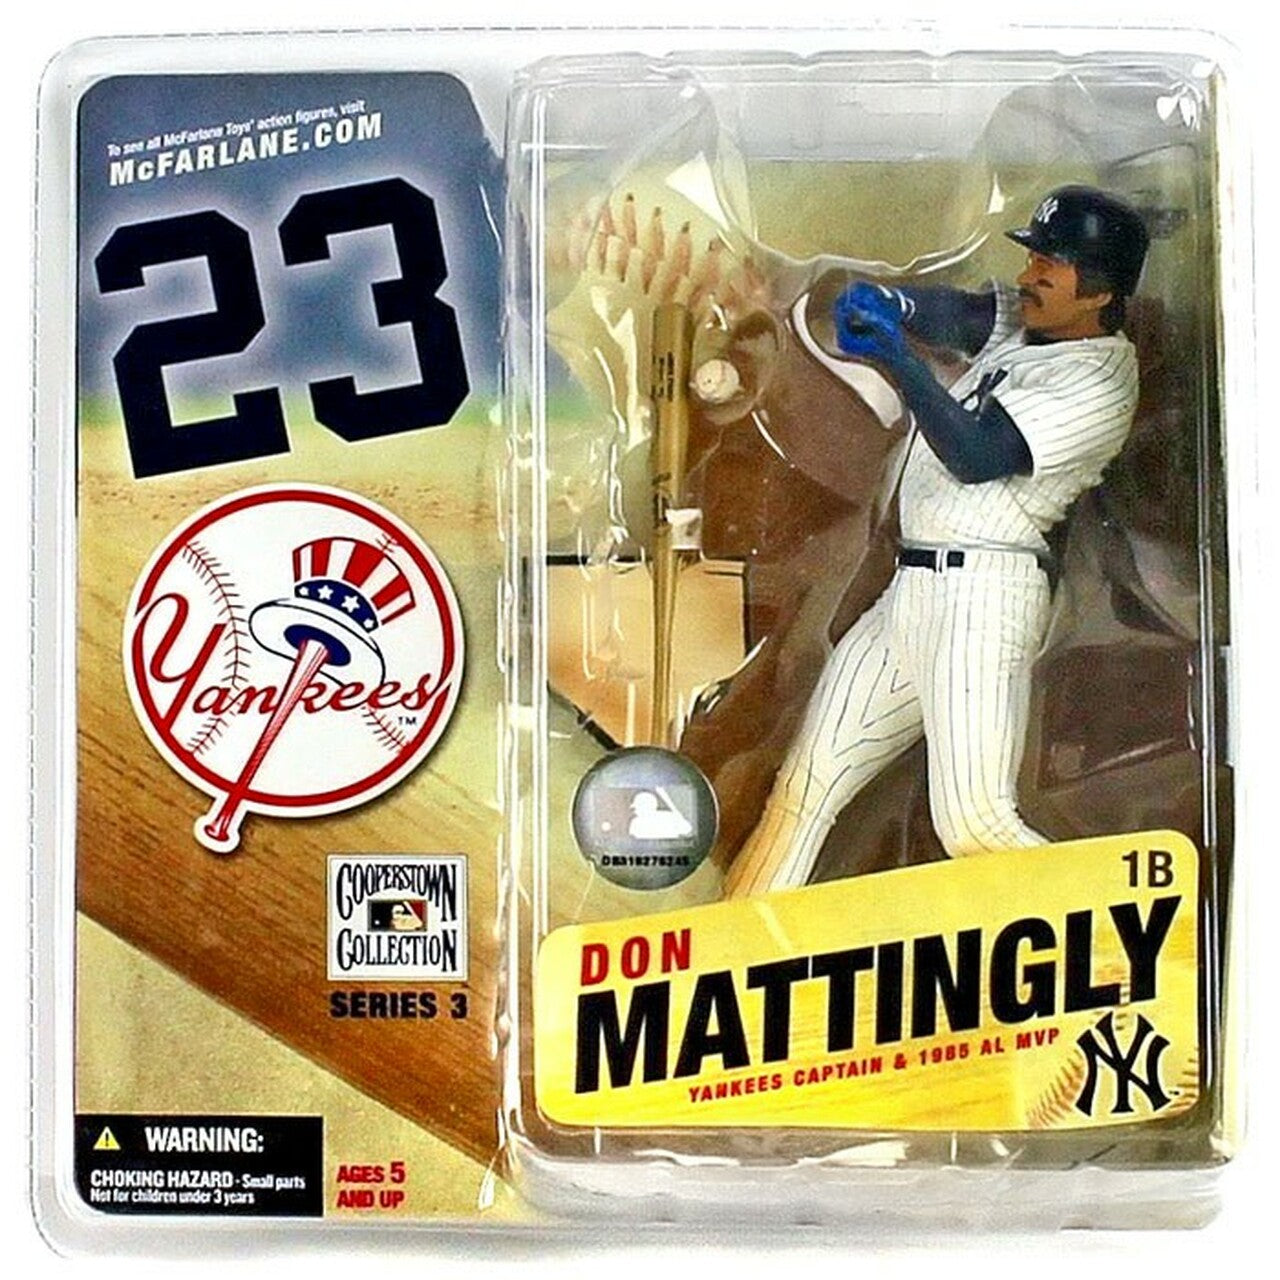 Don Mattingly Jersey - 1985 New York Yankees Cooperstown Home